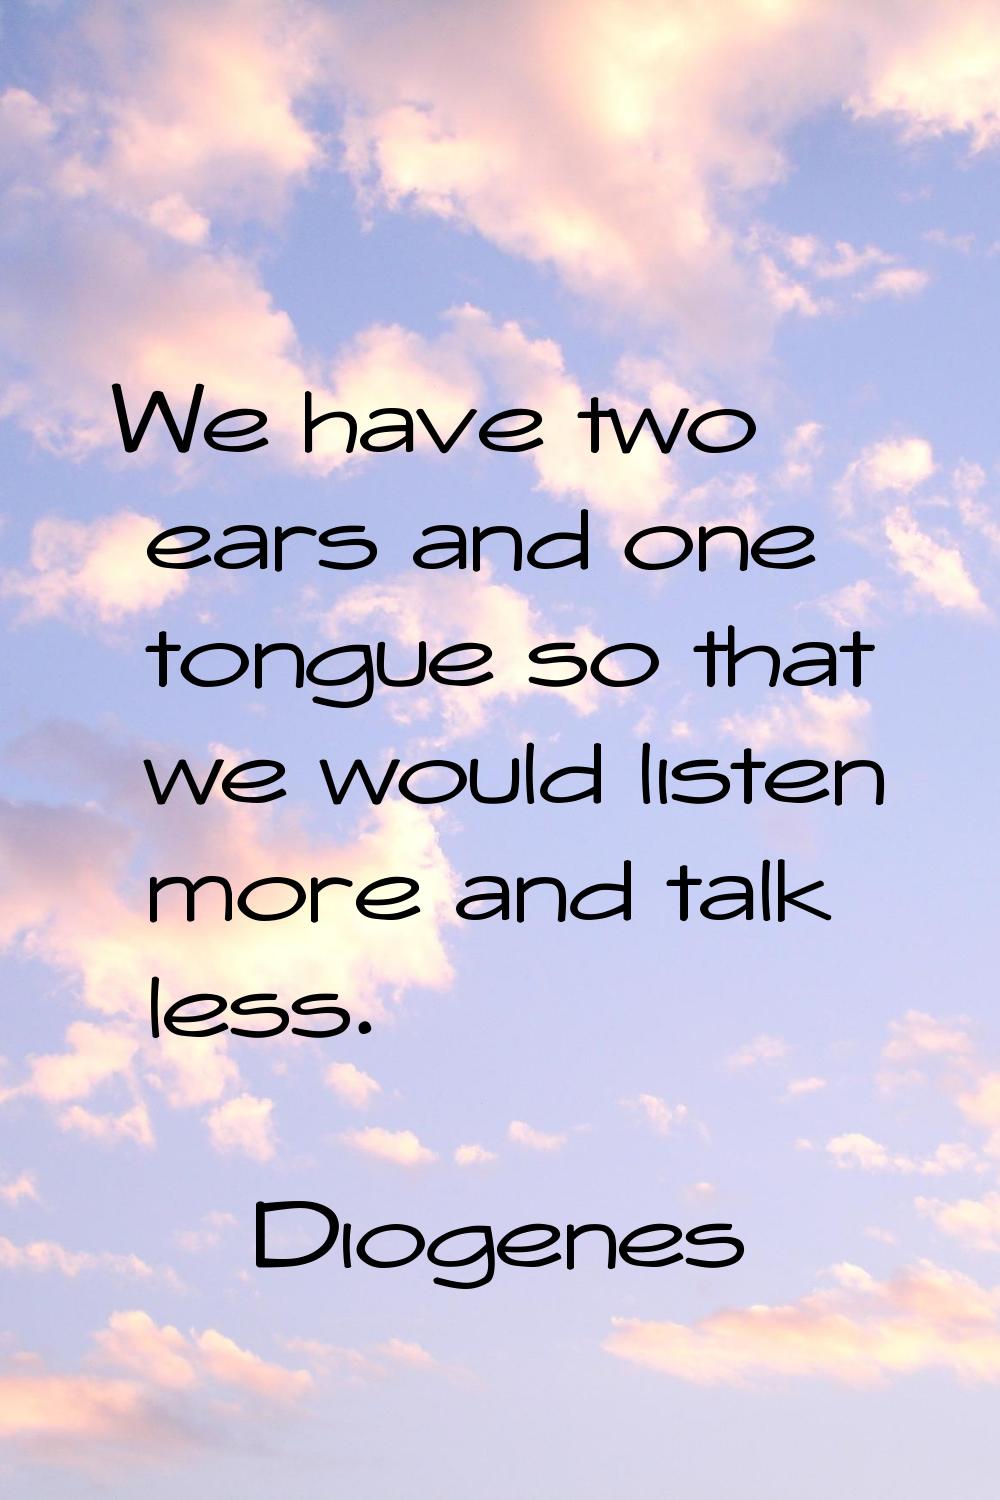 We have two ears and one tongue so that we would listen more and talk less.